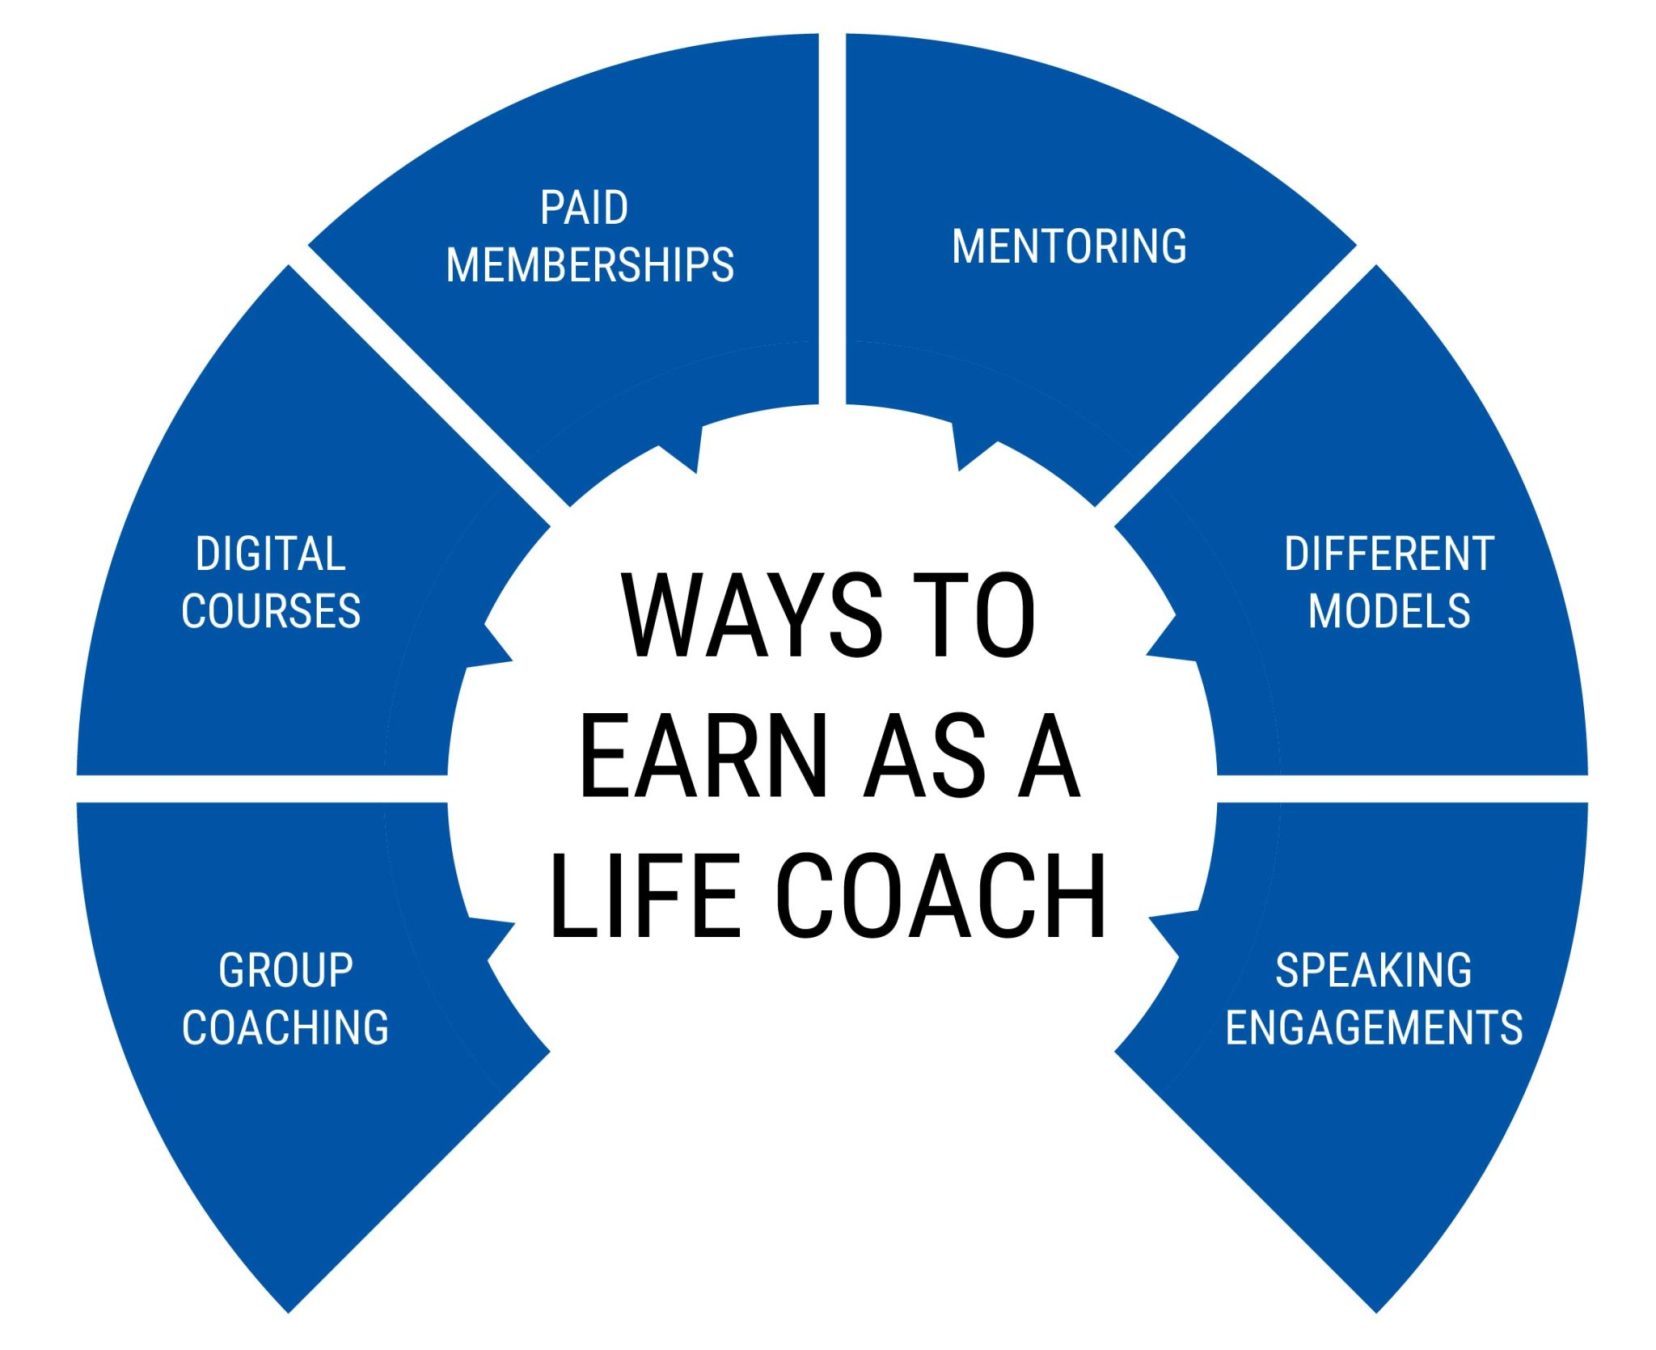 WAYS TO EARN AS A LIFE COACH